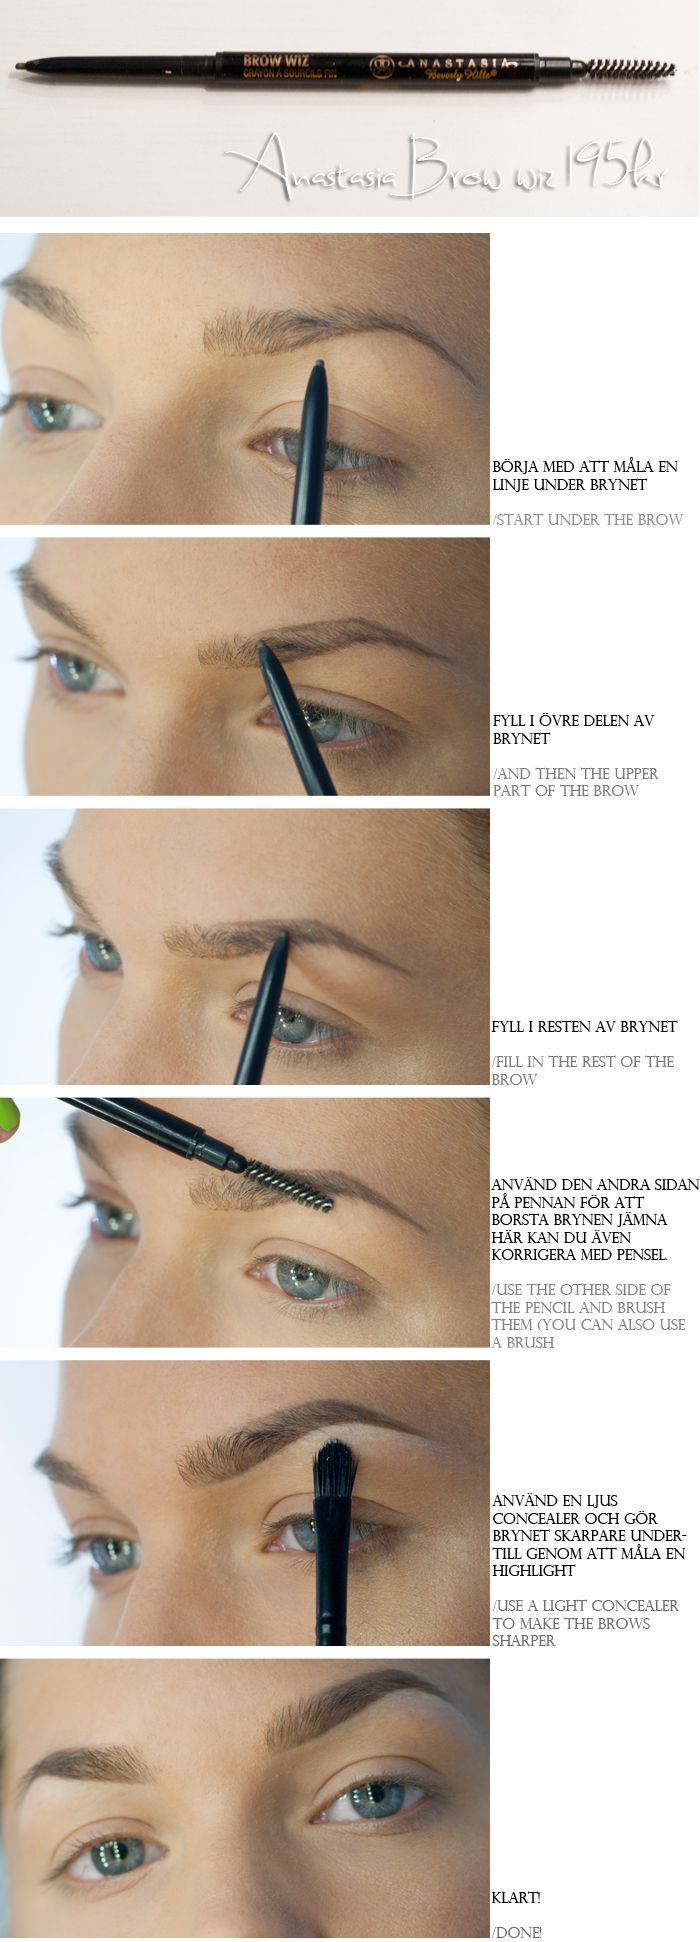 brows are so important!  consider cleaning them up a little and making sure they